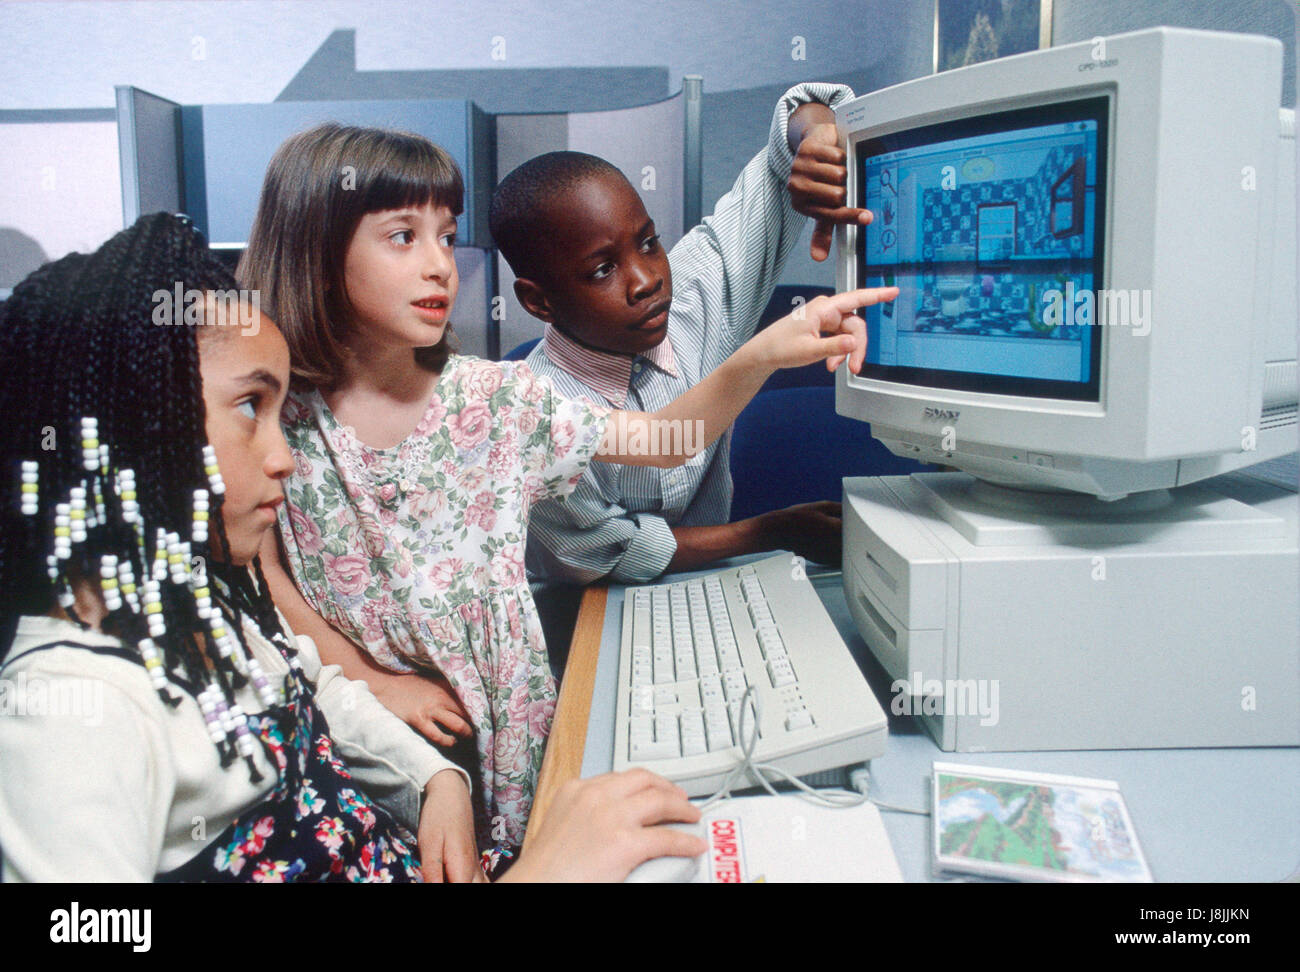 school children (students) using an computer in the early 2000s Stock Photo